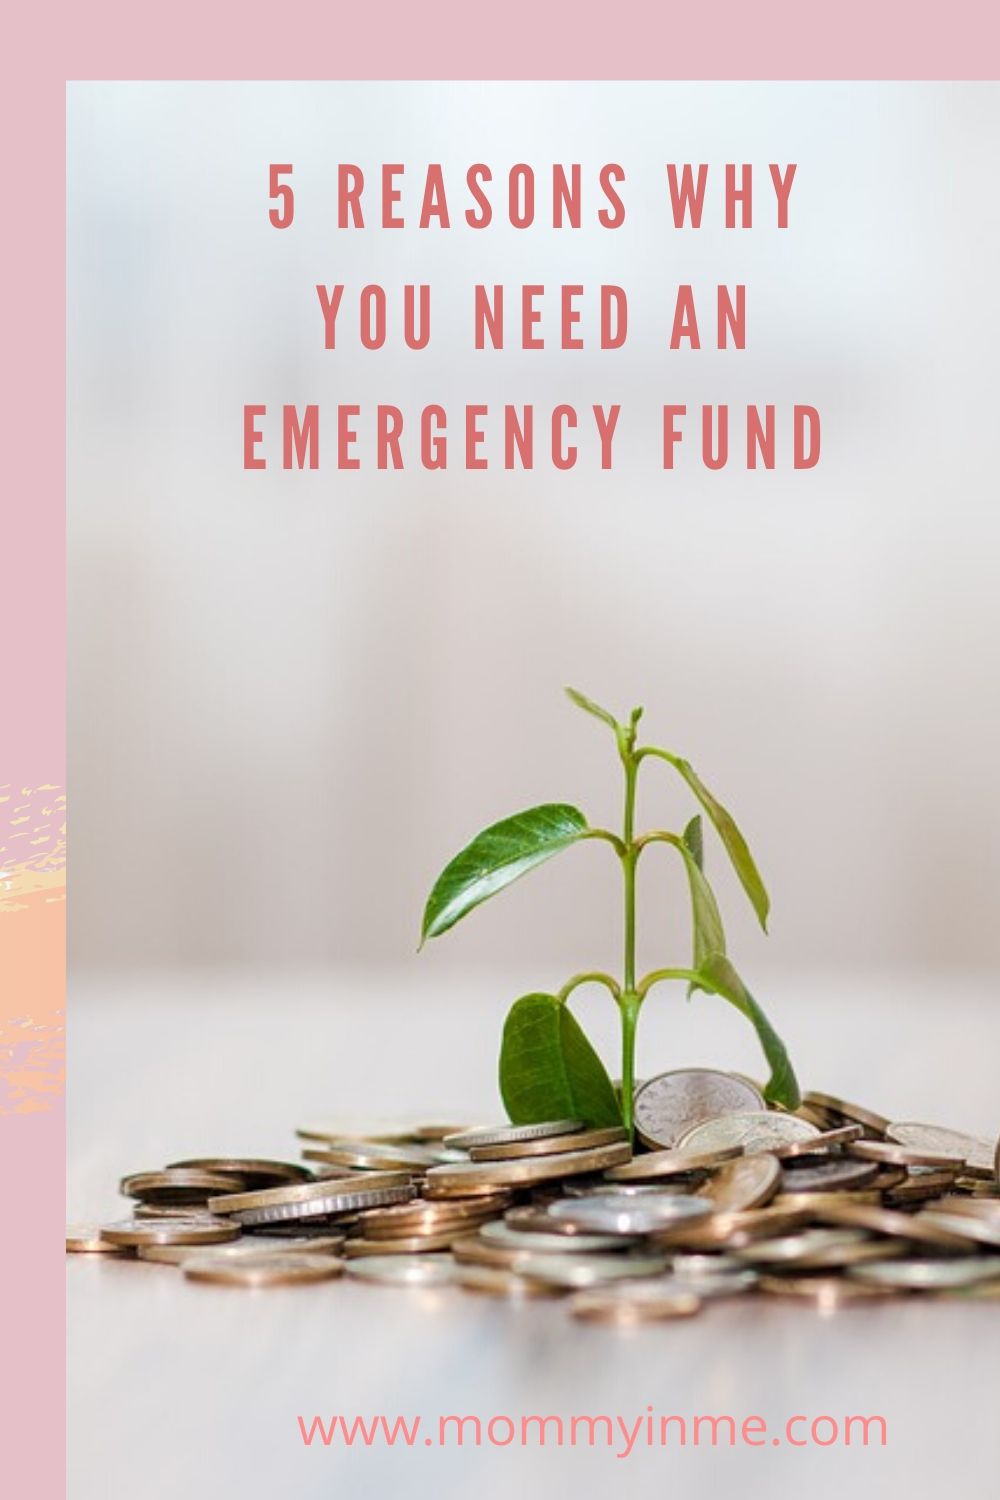 5 Reasons why you need an Emergency Fund, even if you are single. #emergencyfund #creditcards #homerepair #carrepair #medicalemergency #jobloss #covid19 #economiccrisis 